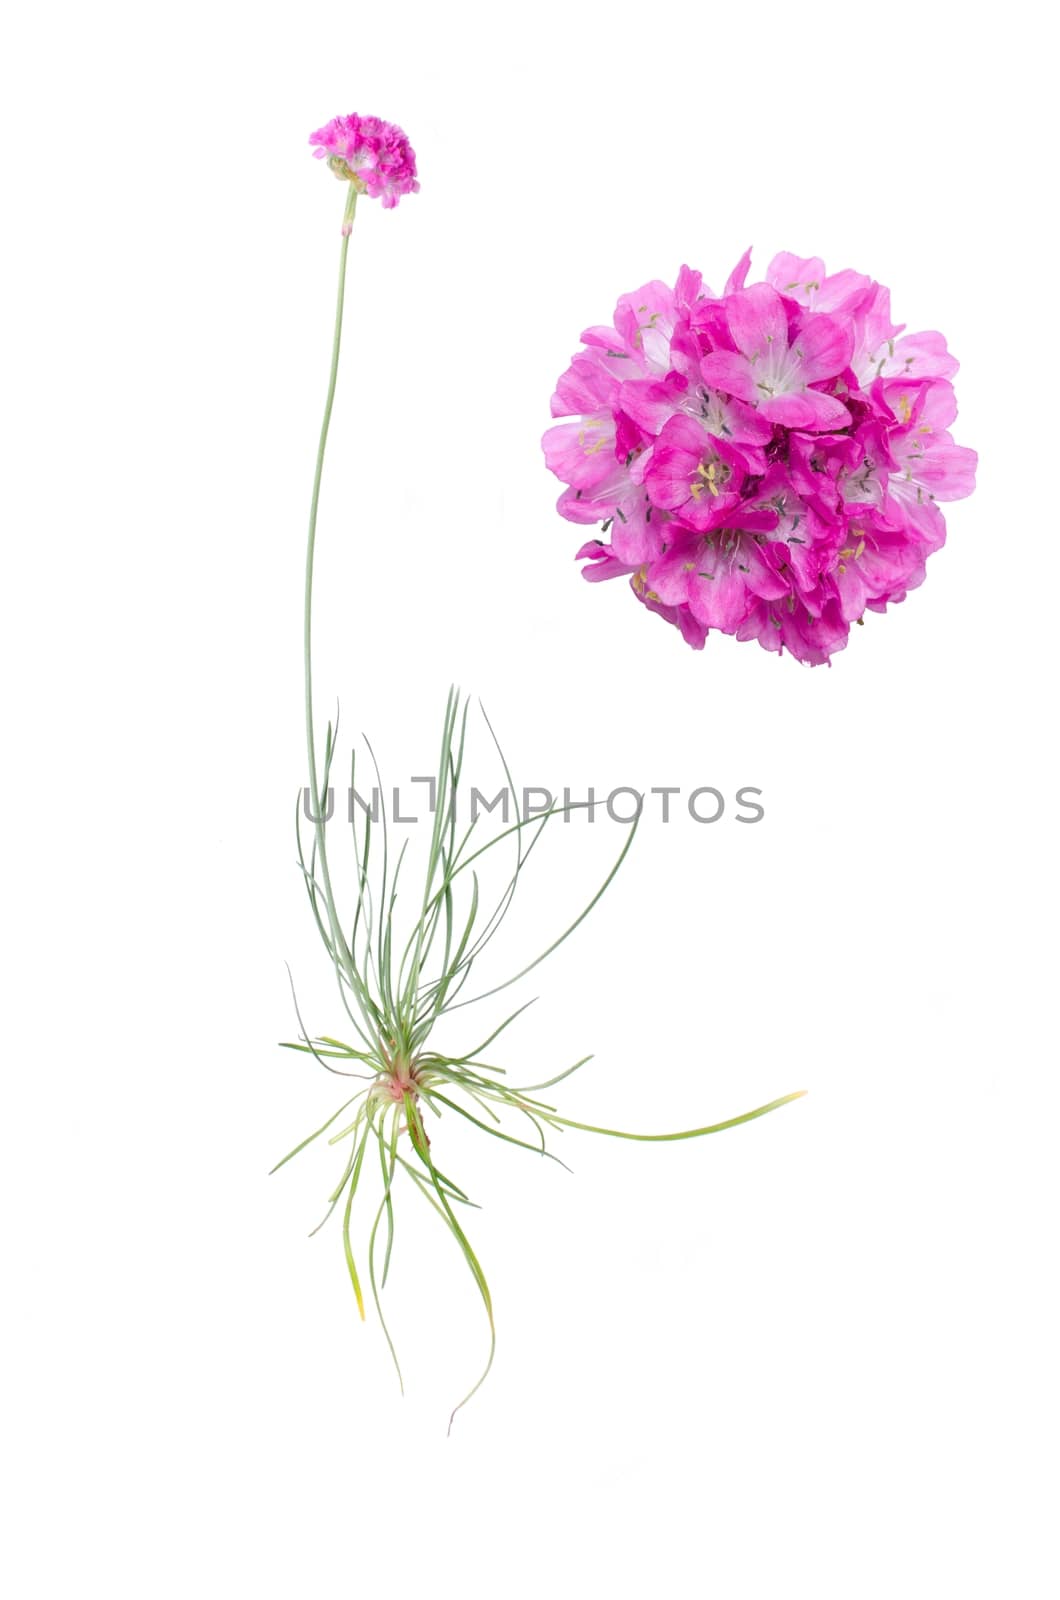 Armeria juniperifolia and detail of bloom isolated on white background.